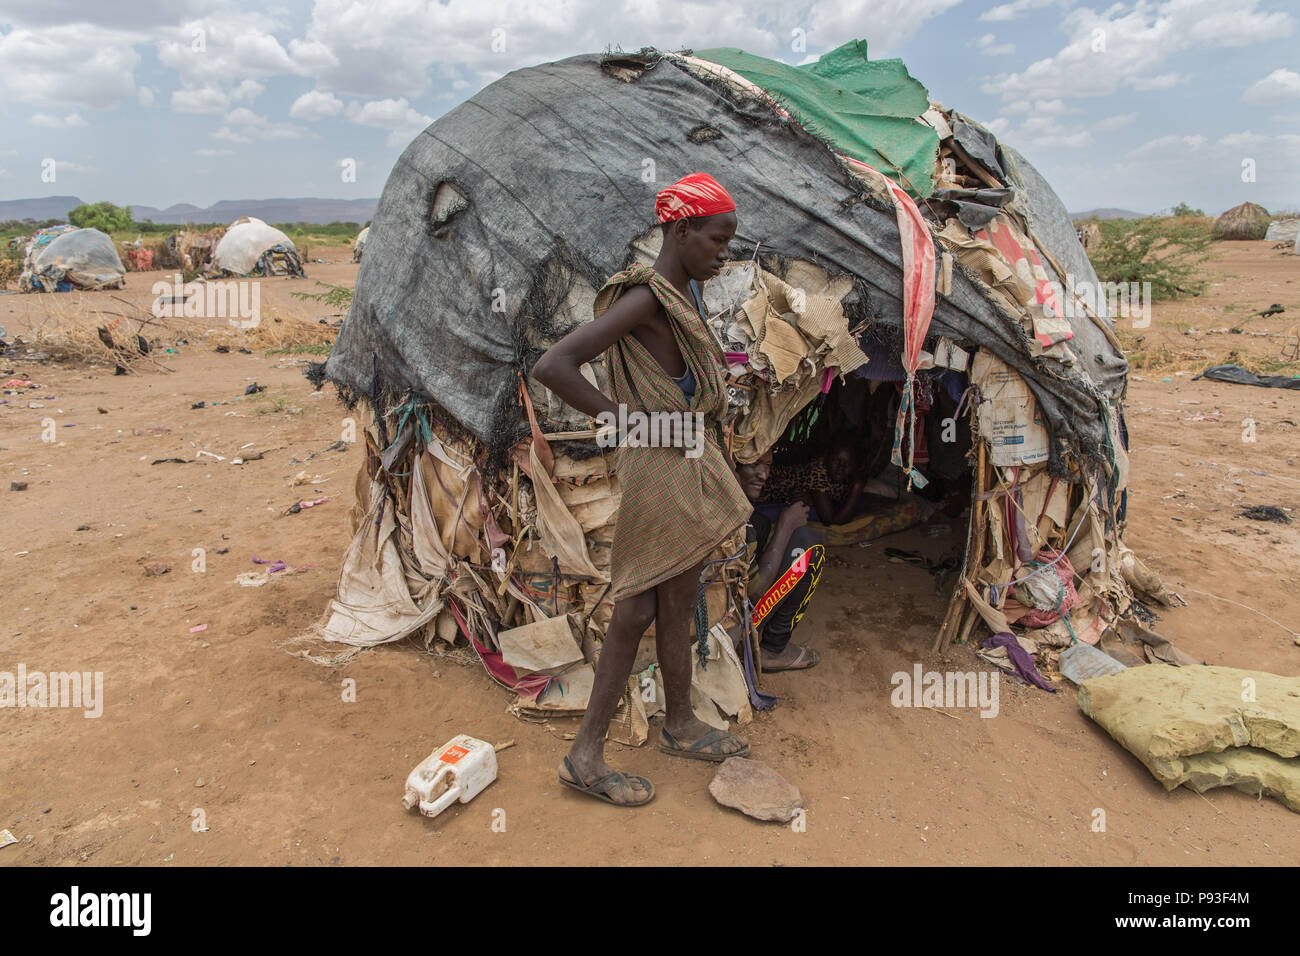 Kakuma, Kenya - On the edge of the refugee camp Kakuma. A young man stands in front of his hut, covered with old plastic tarpaulins, blankets and cardboard boxes. Stock Photo